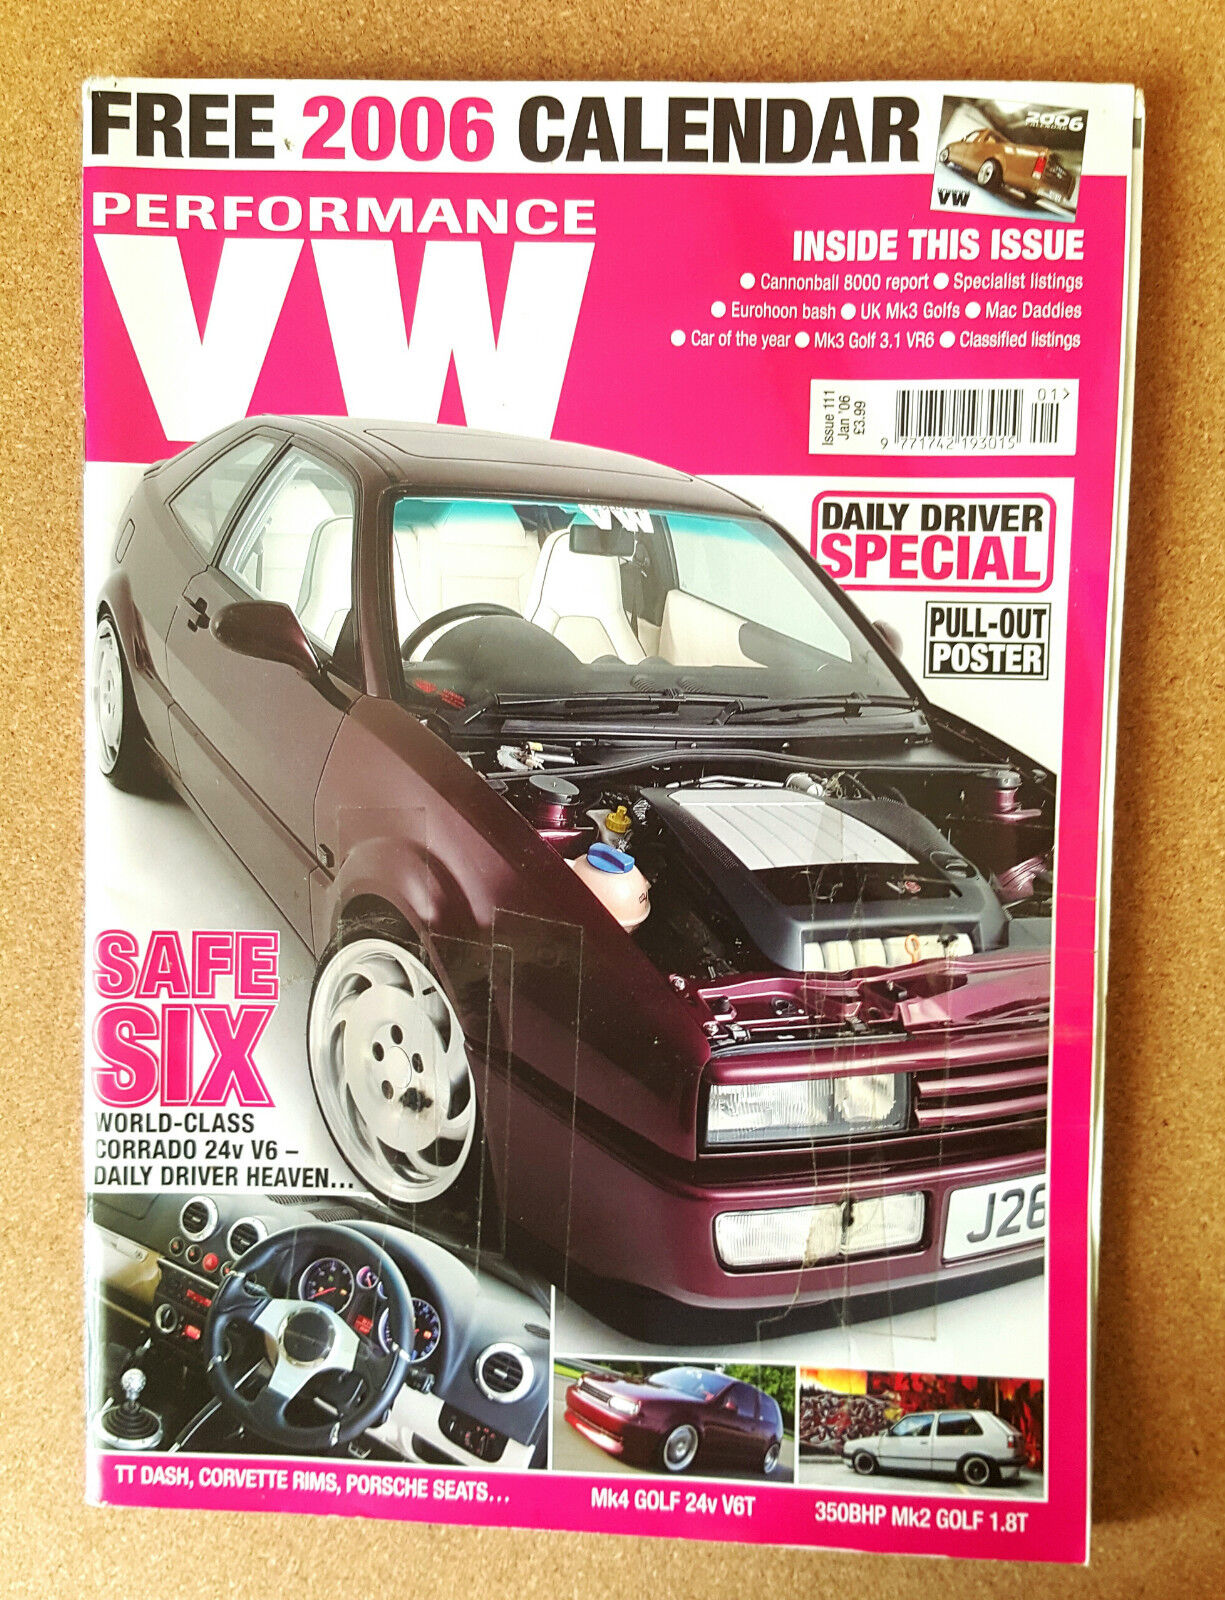 Magazine - Performance VW Volkswagen Cars Contents Index Shown - Various Dates